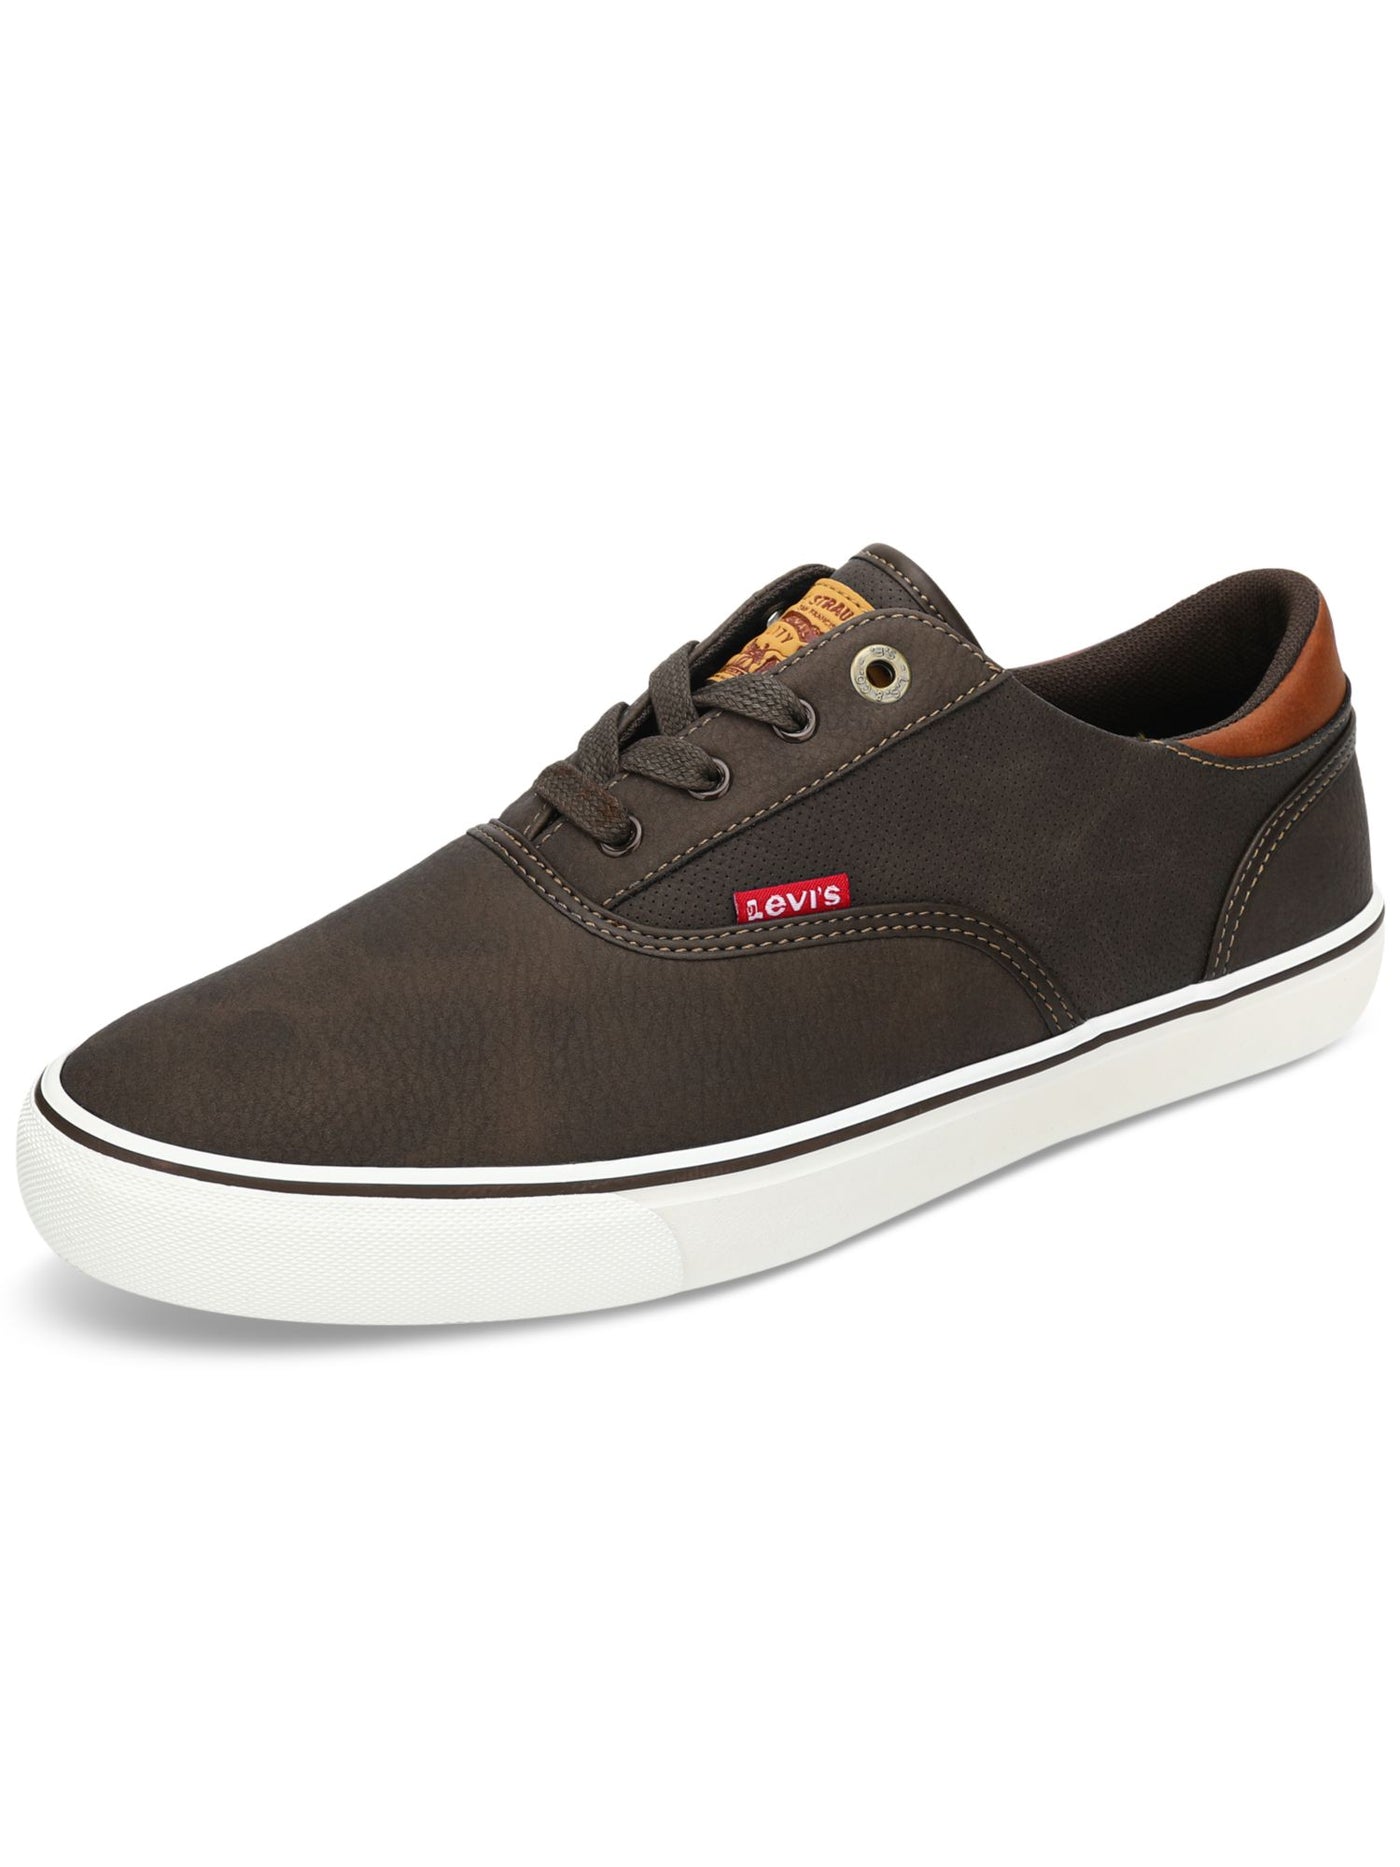 LEVI'S Mens Brown Cushioned Comfort Ethan Round Toe Lace-Up Sneakers Shoes 8.5